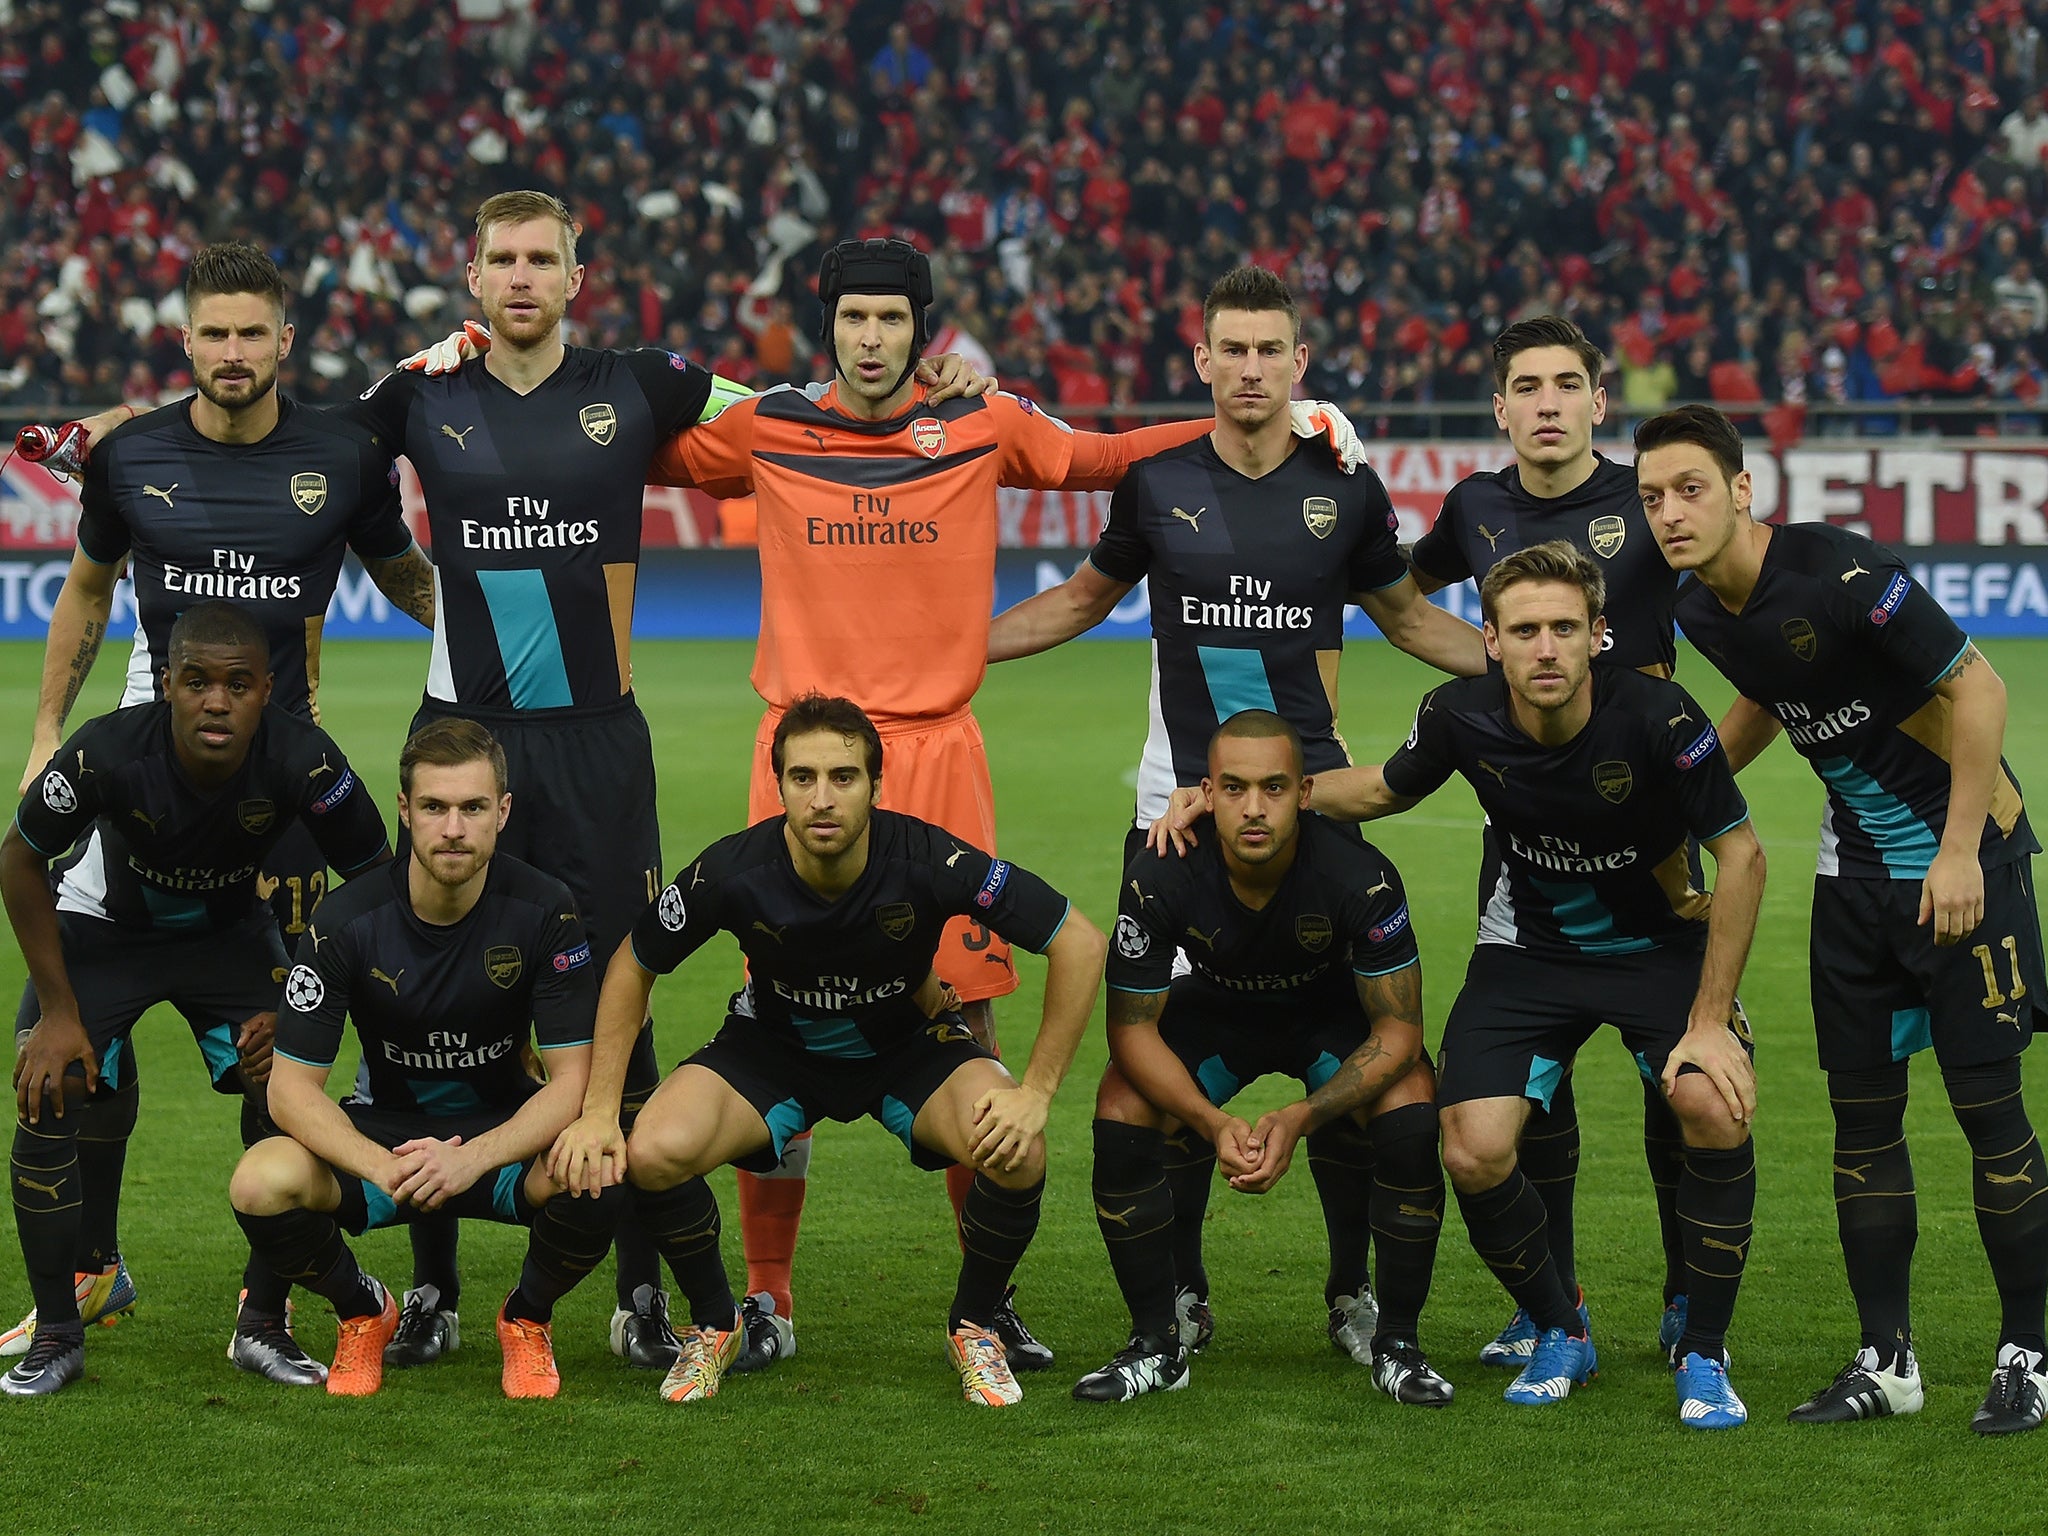 The Gunners, in their third strip, before kick off